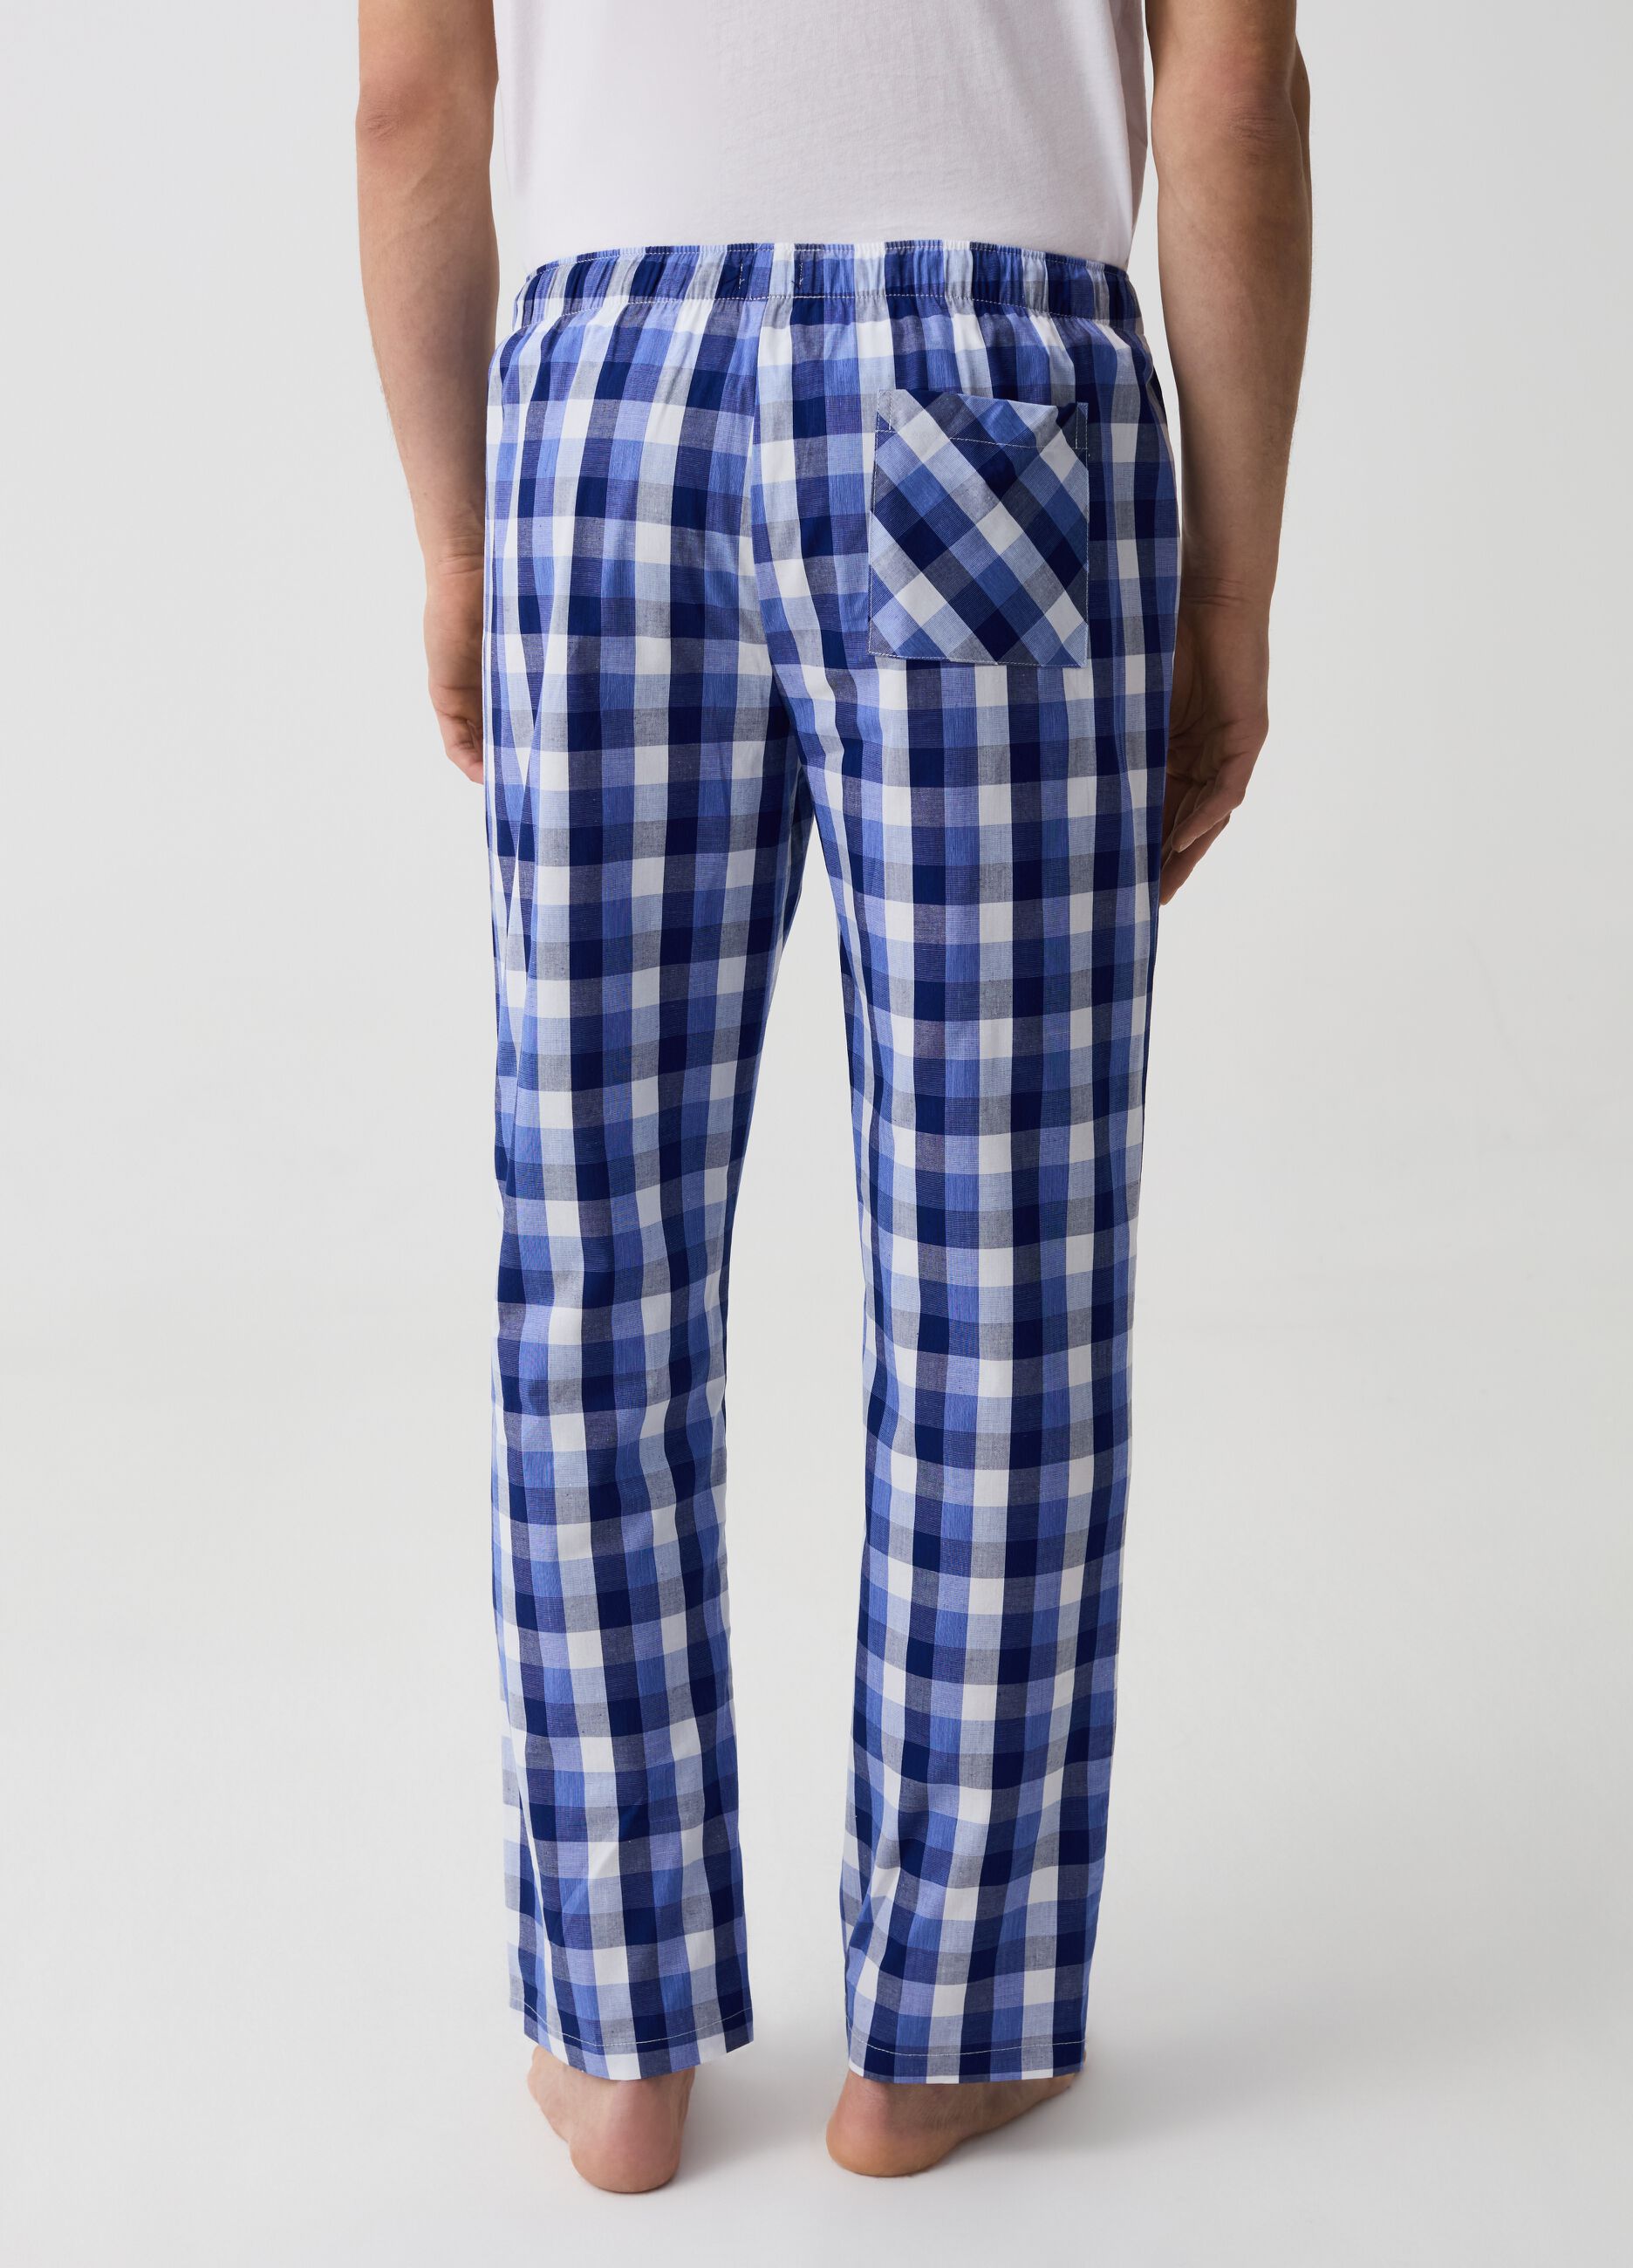 Pyjama trousers in patterned cotton